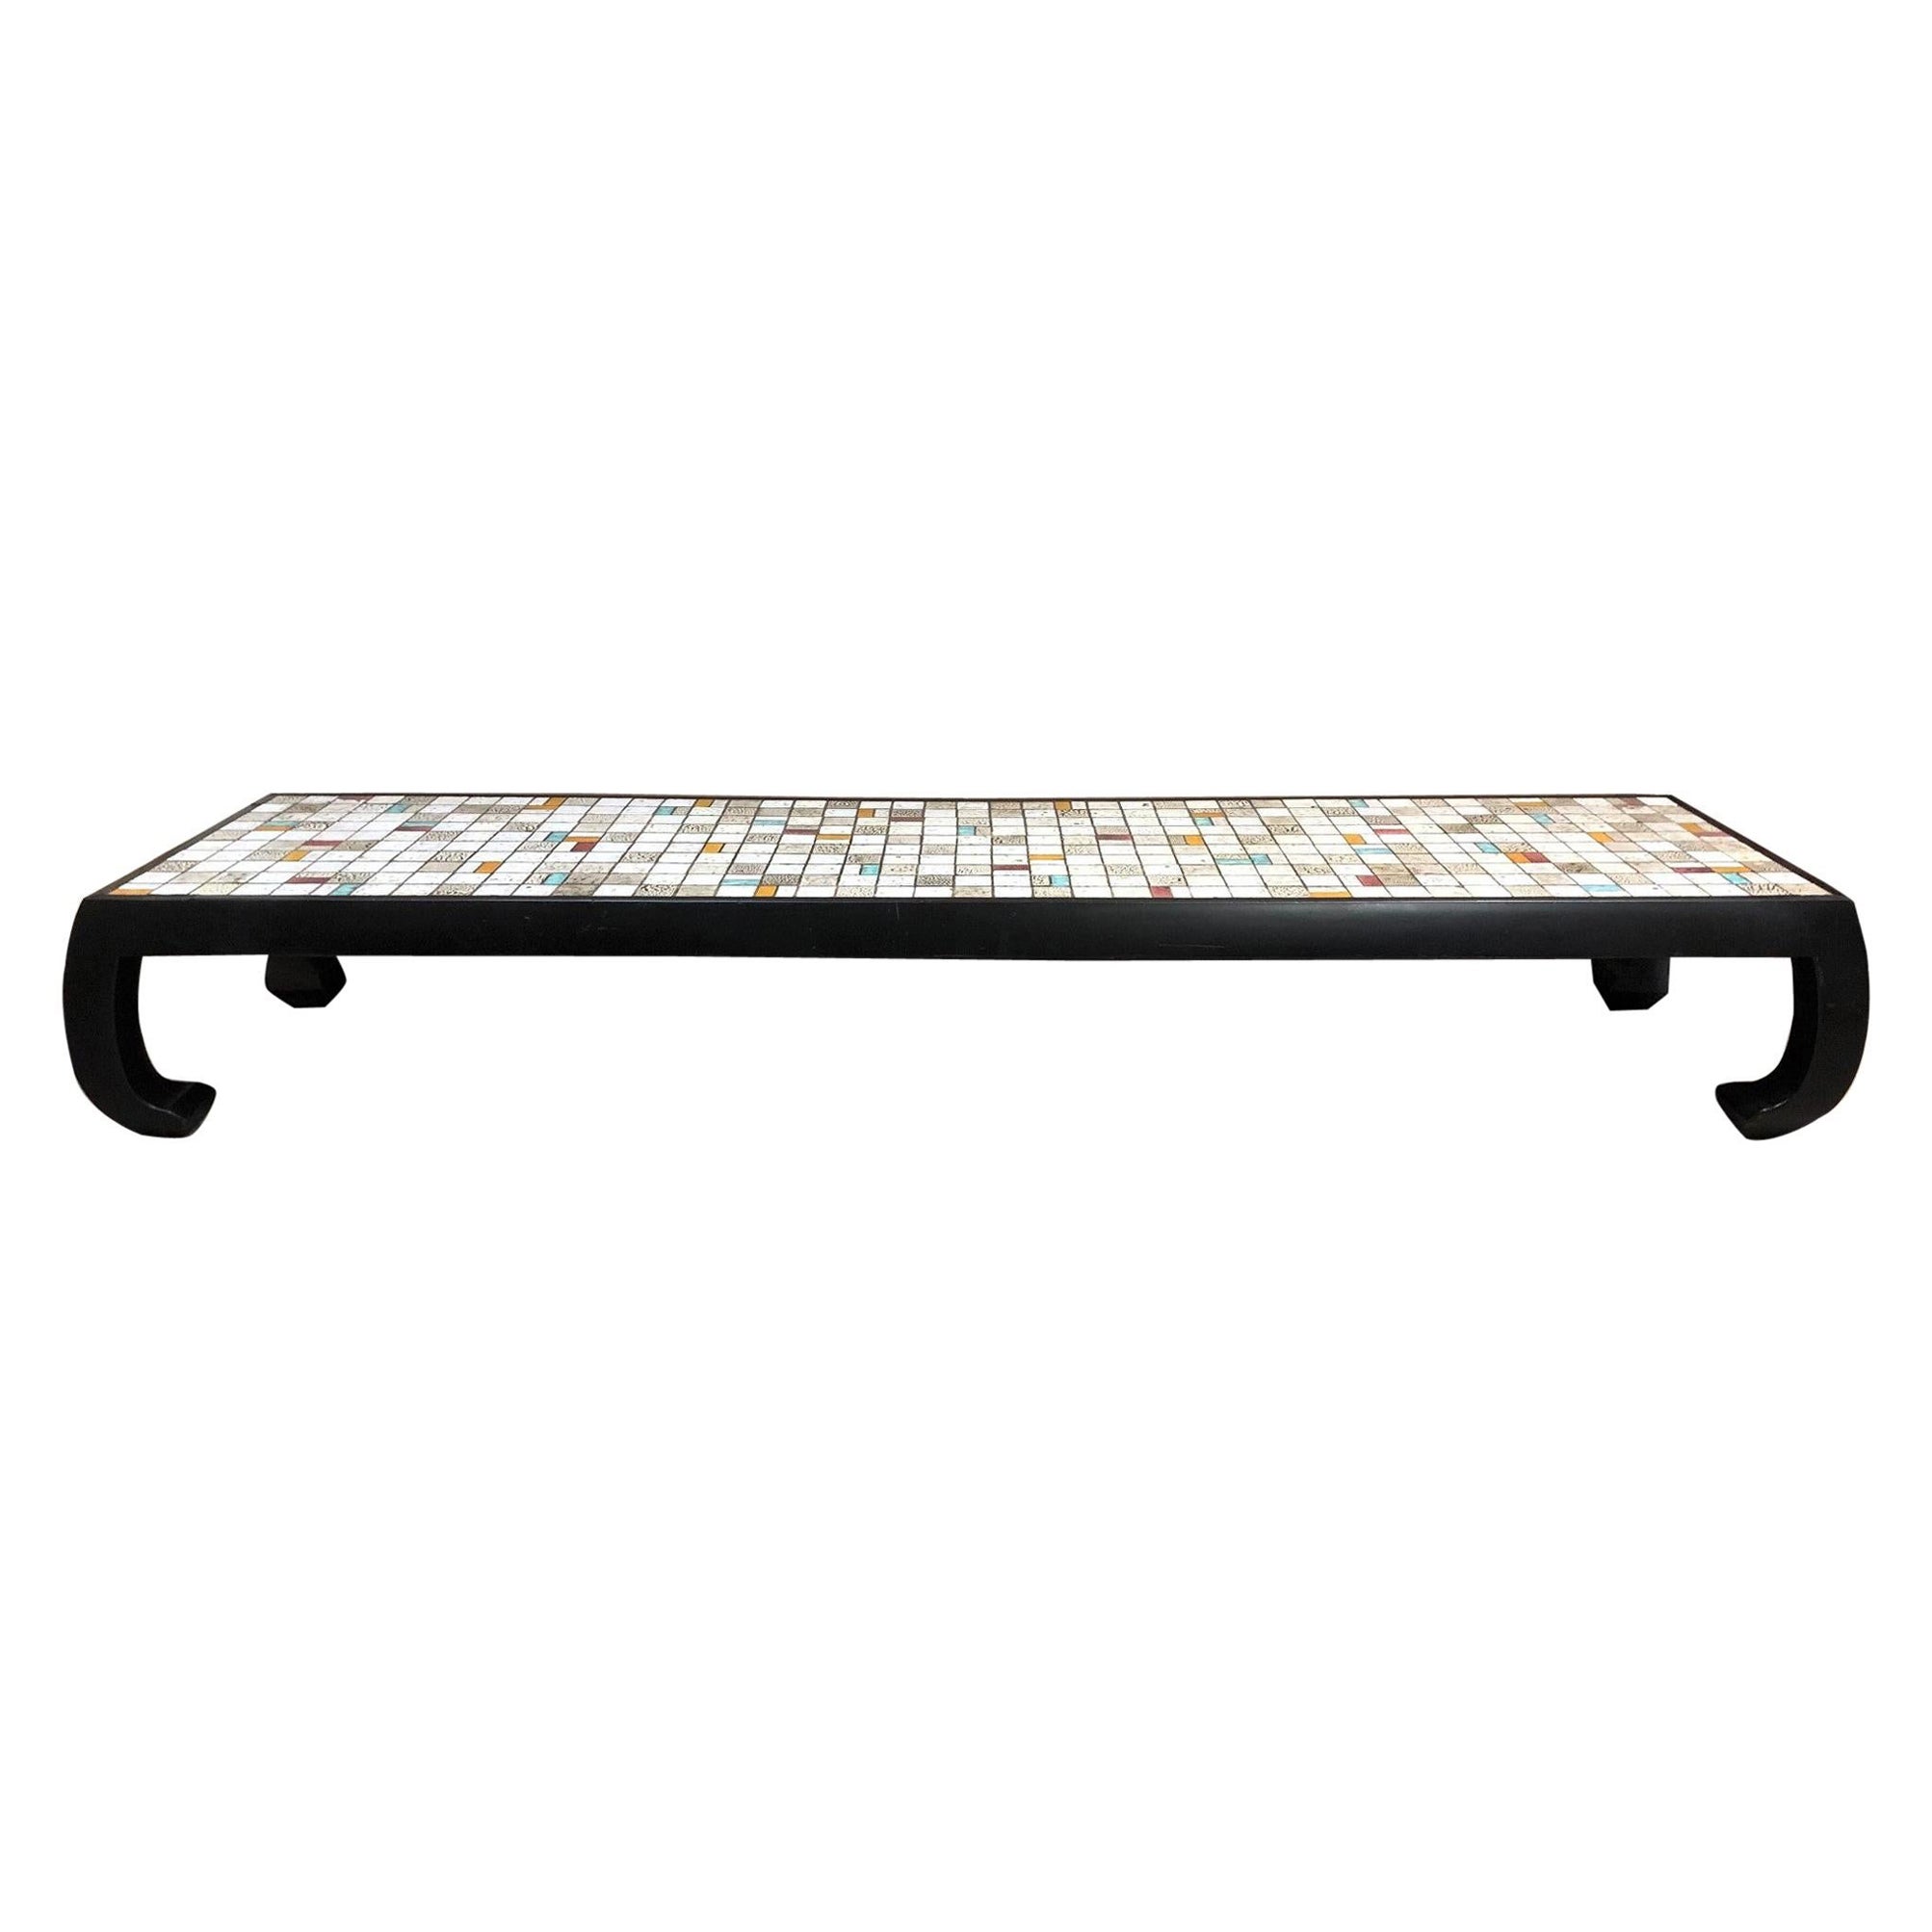 Long Tile-Top Asian Style Coffee Table